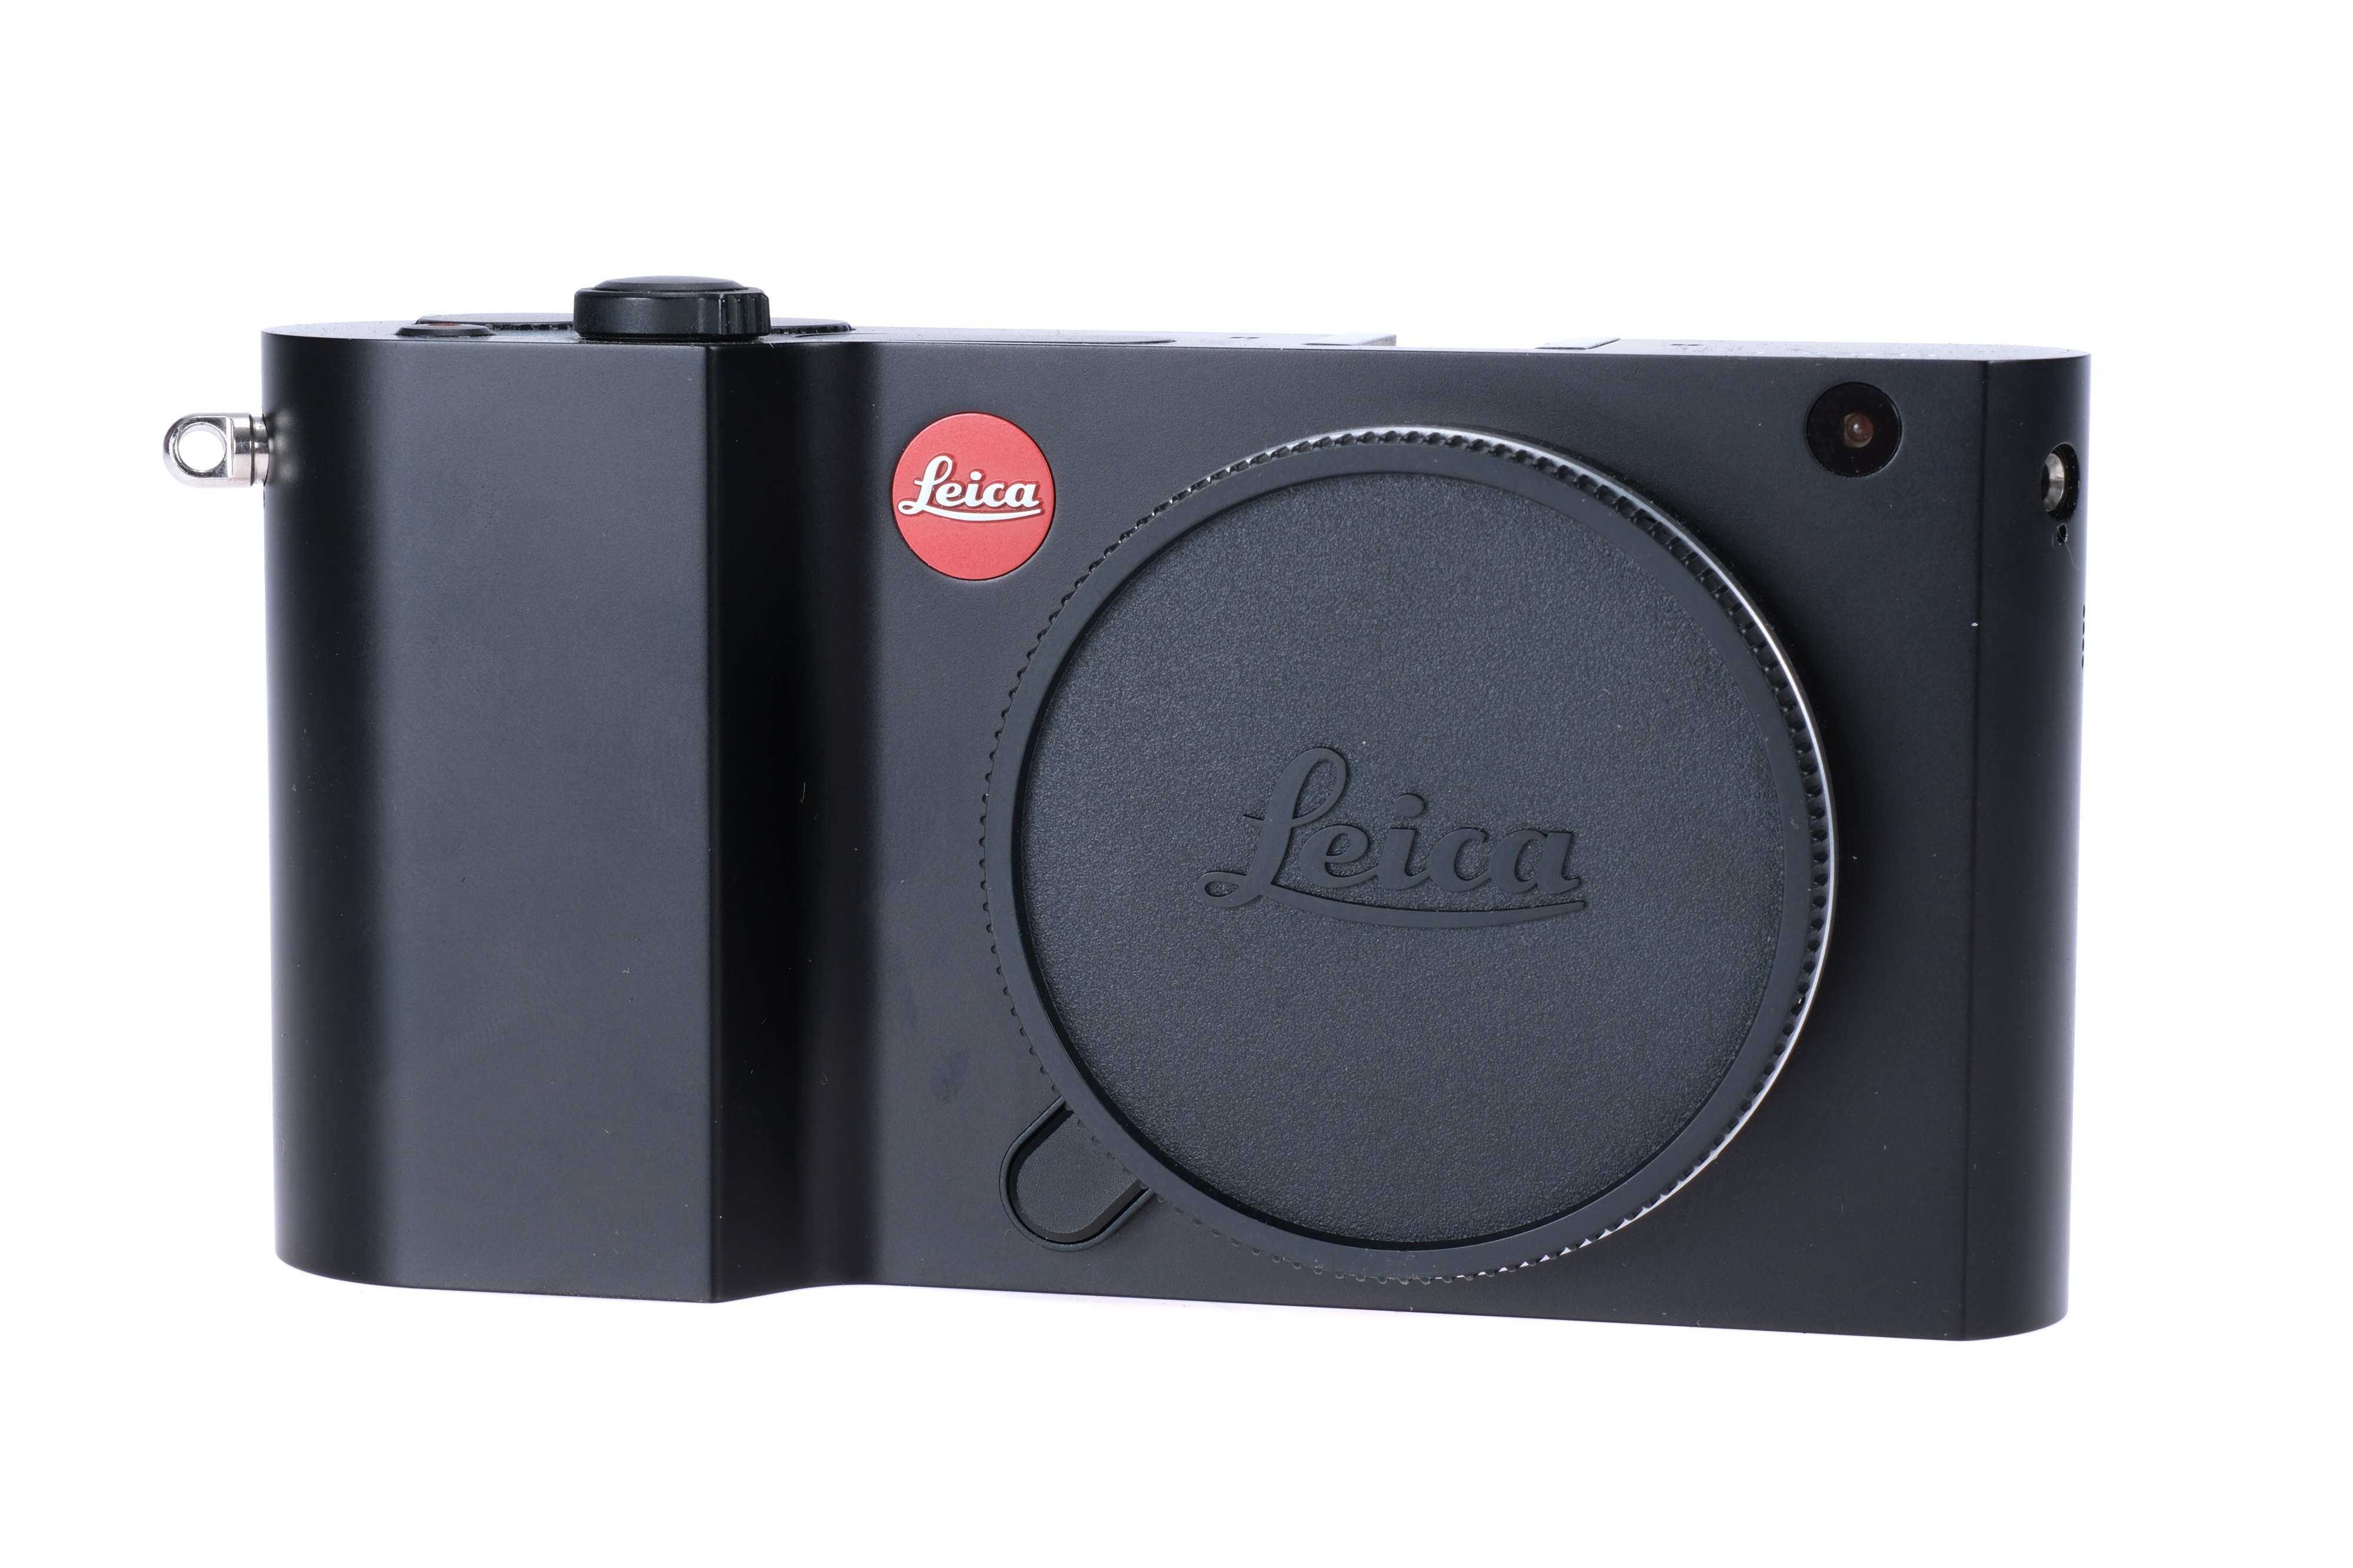 A Leica T Type 701 Digital Camera Body, - Image 2 of 6